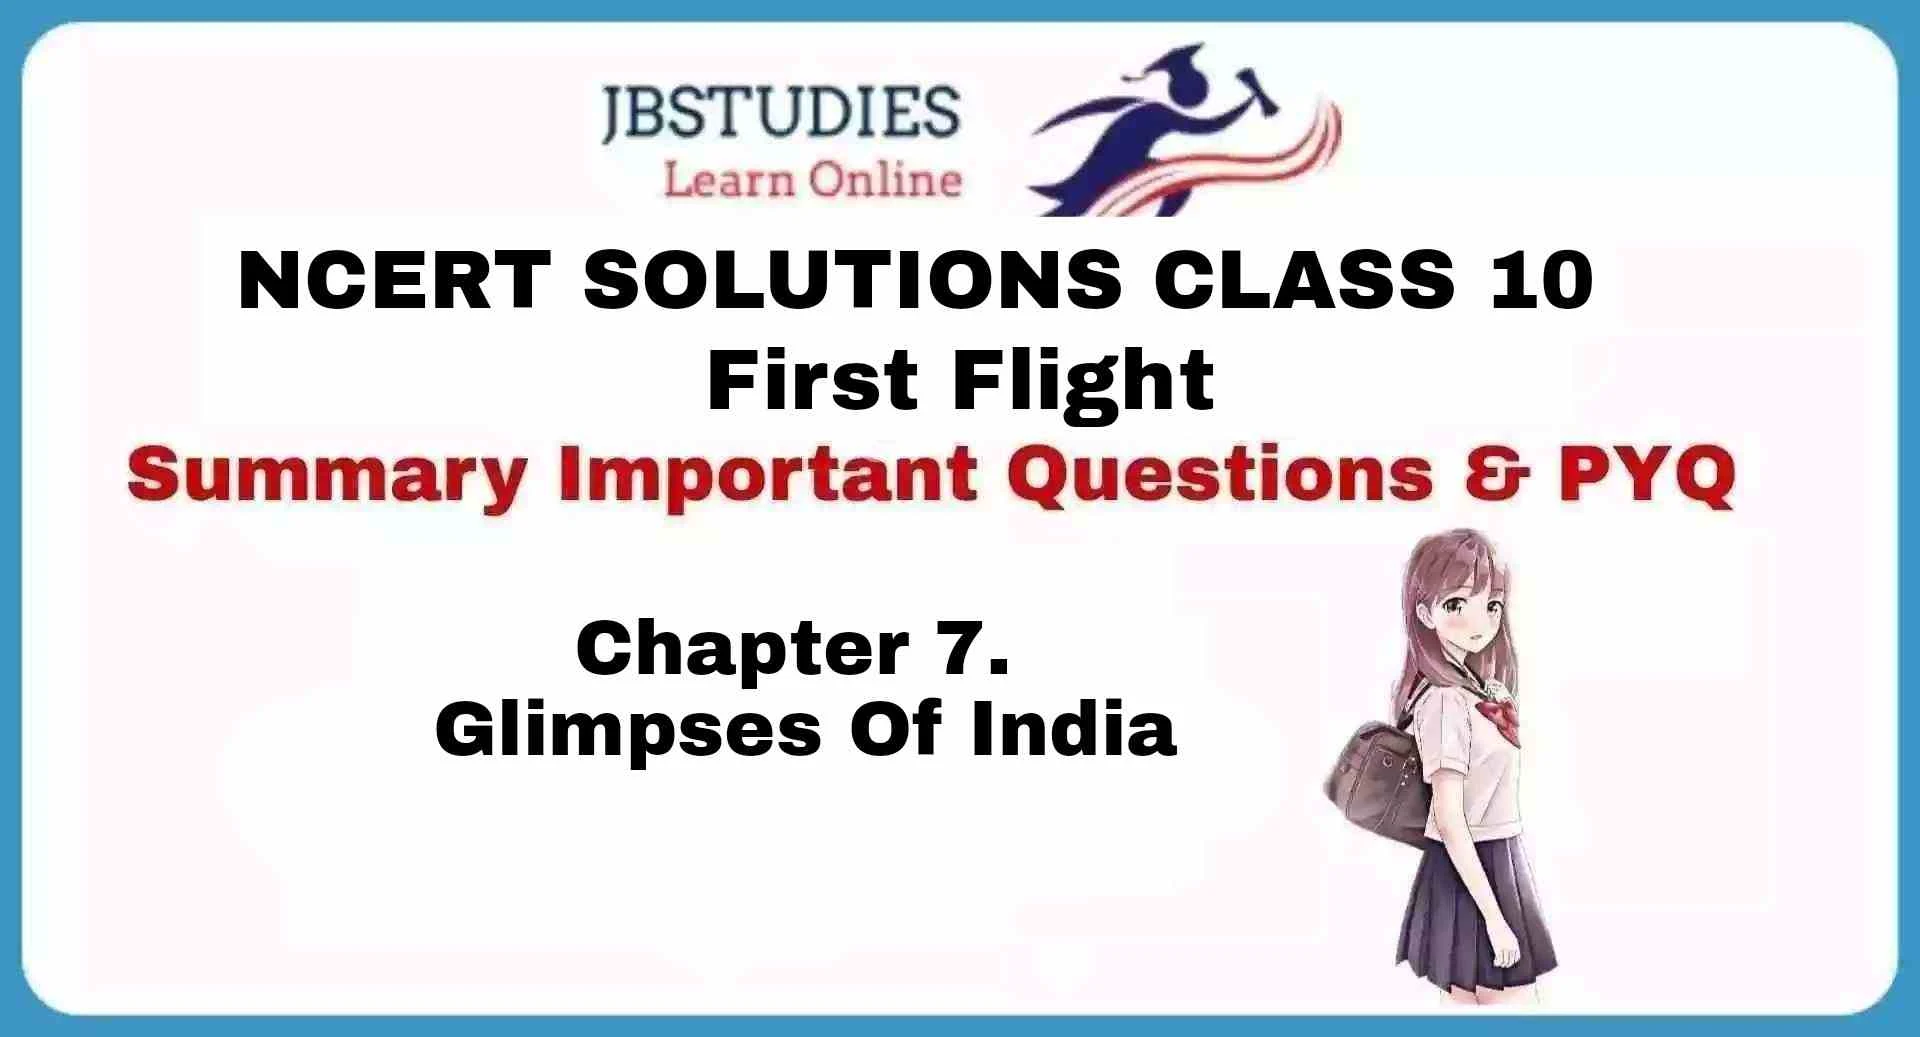 Solutions Class 10 First Flight Chapter-7 Glimpses of India